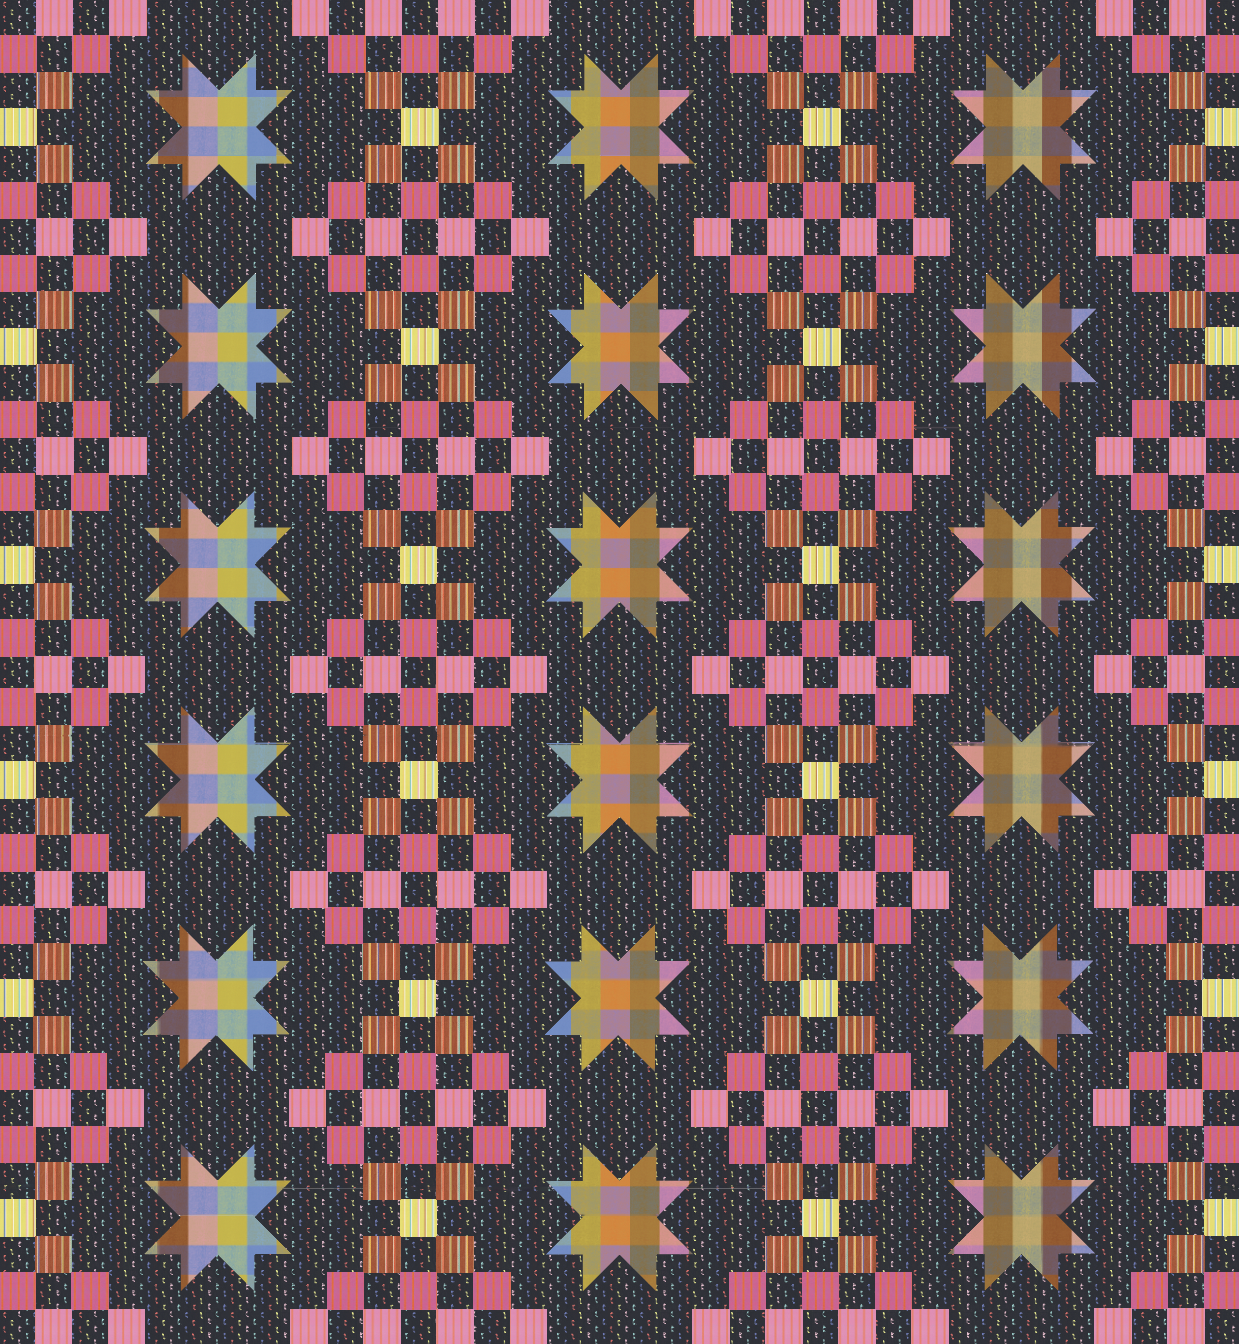 Warp & Weft ooh Lucky Lucky by Alexia Marcelle Abegg : Orchard Stars Quilt Kit (Estimated Arrival Mar. 2025)